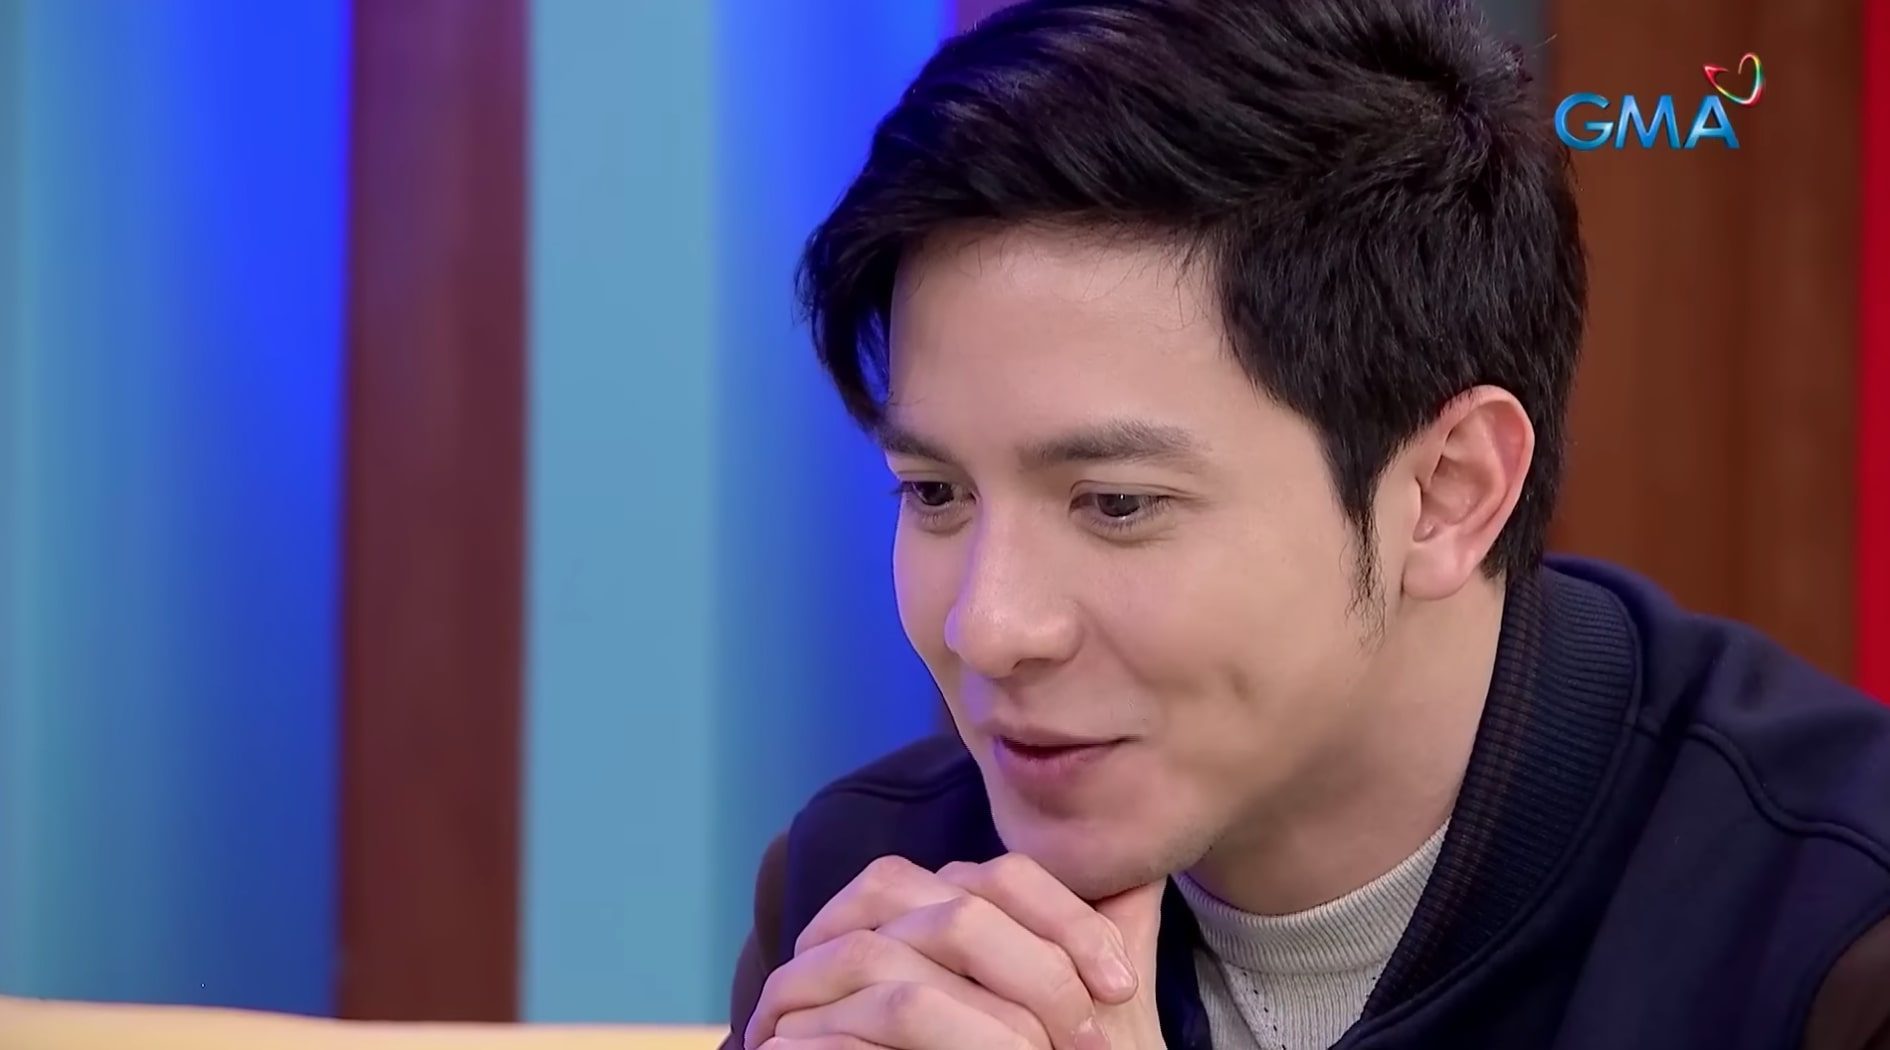 I did confess': Alden Richards admits past romantic feelings for